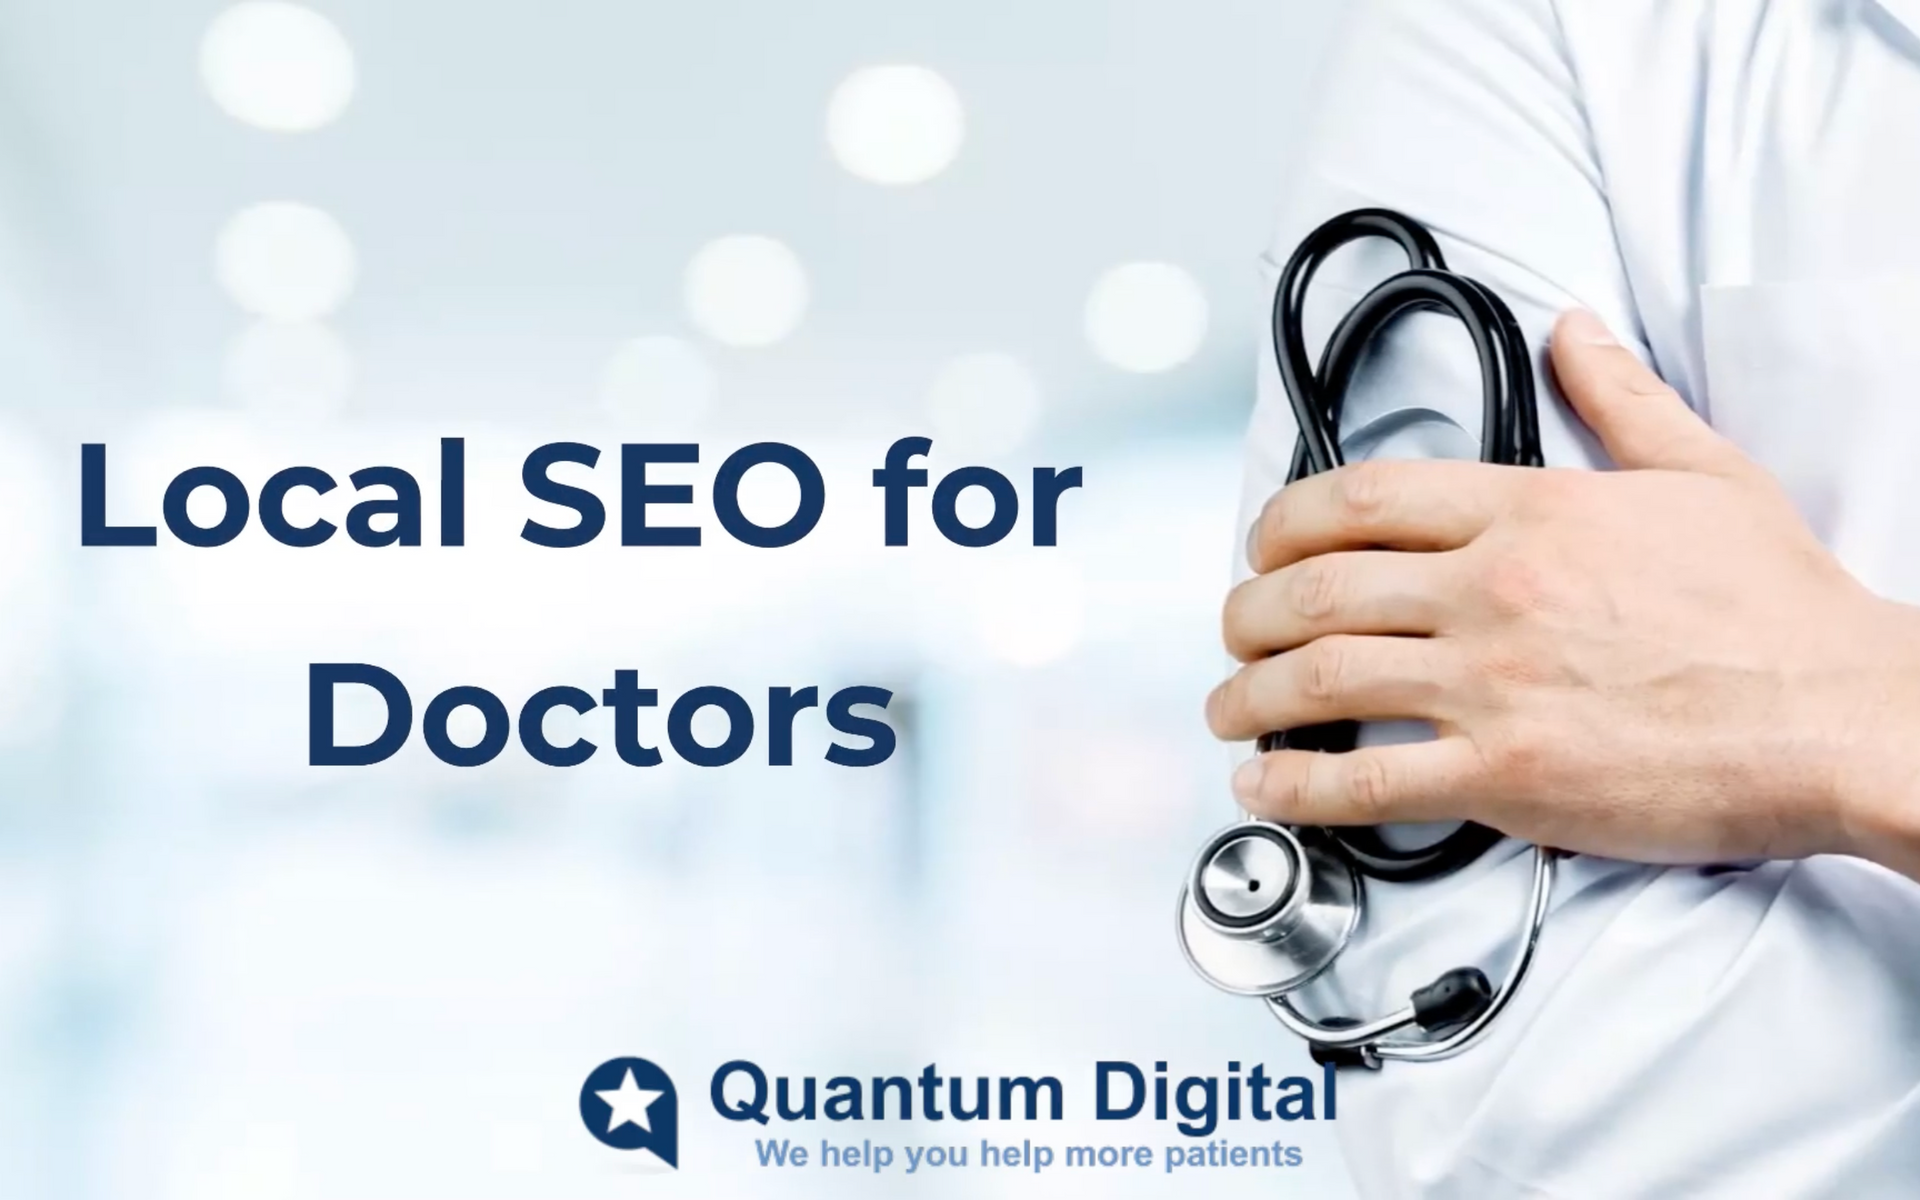 SEO for Doctors, SEO for Medical Practice